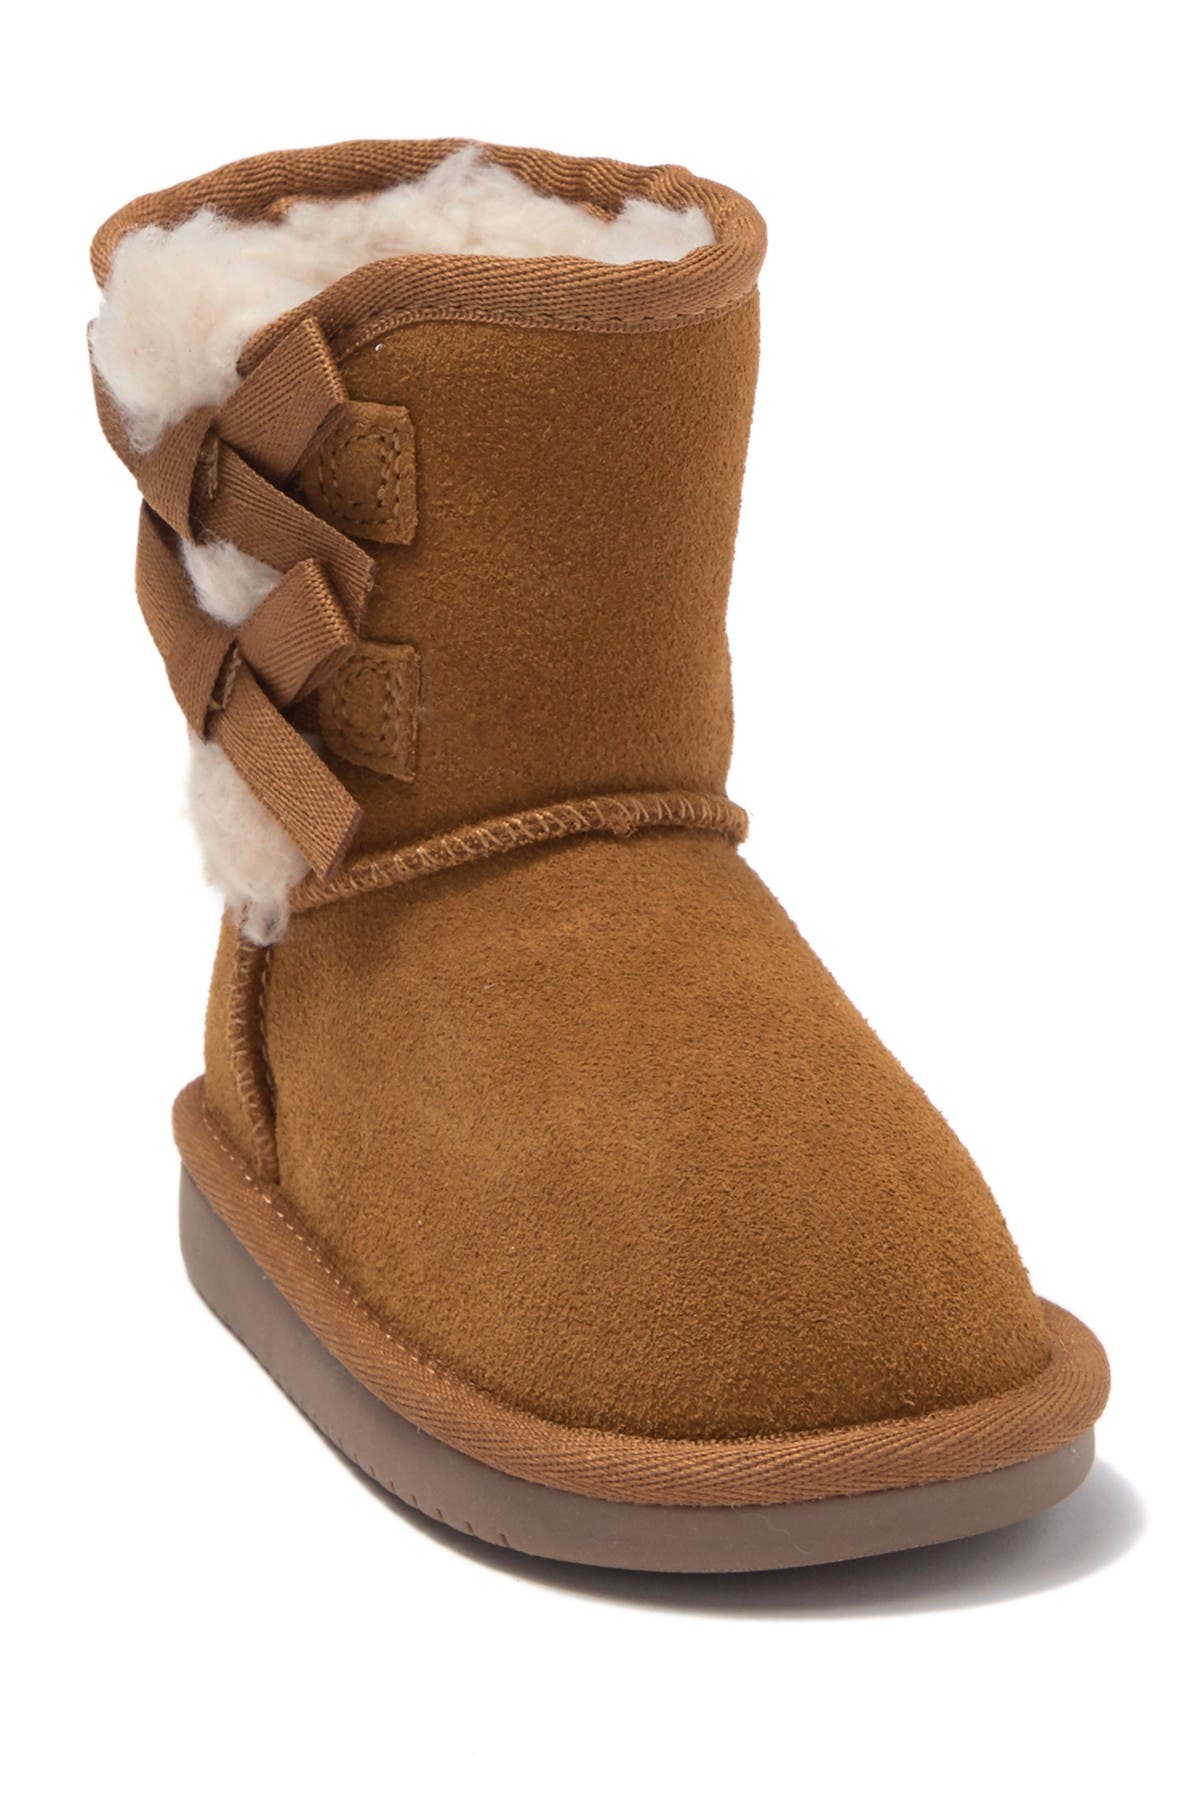 knock off uggs with bows